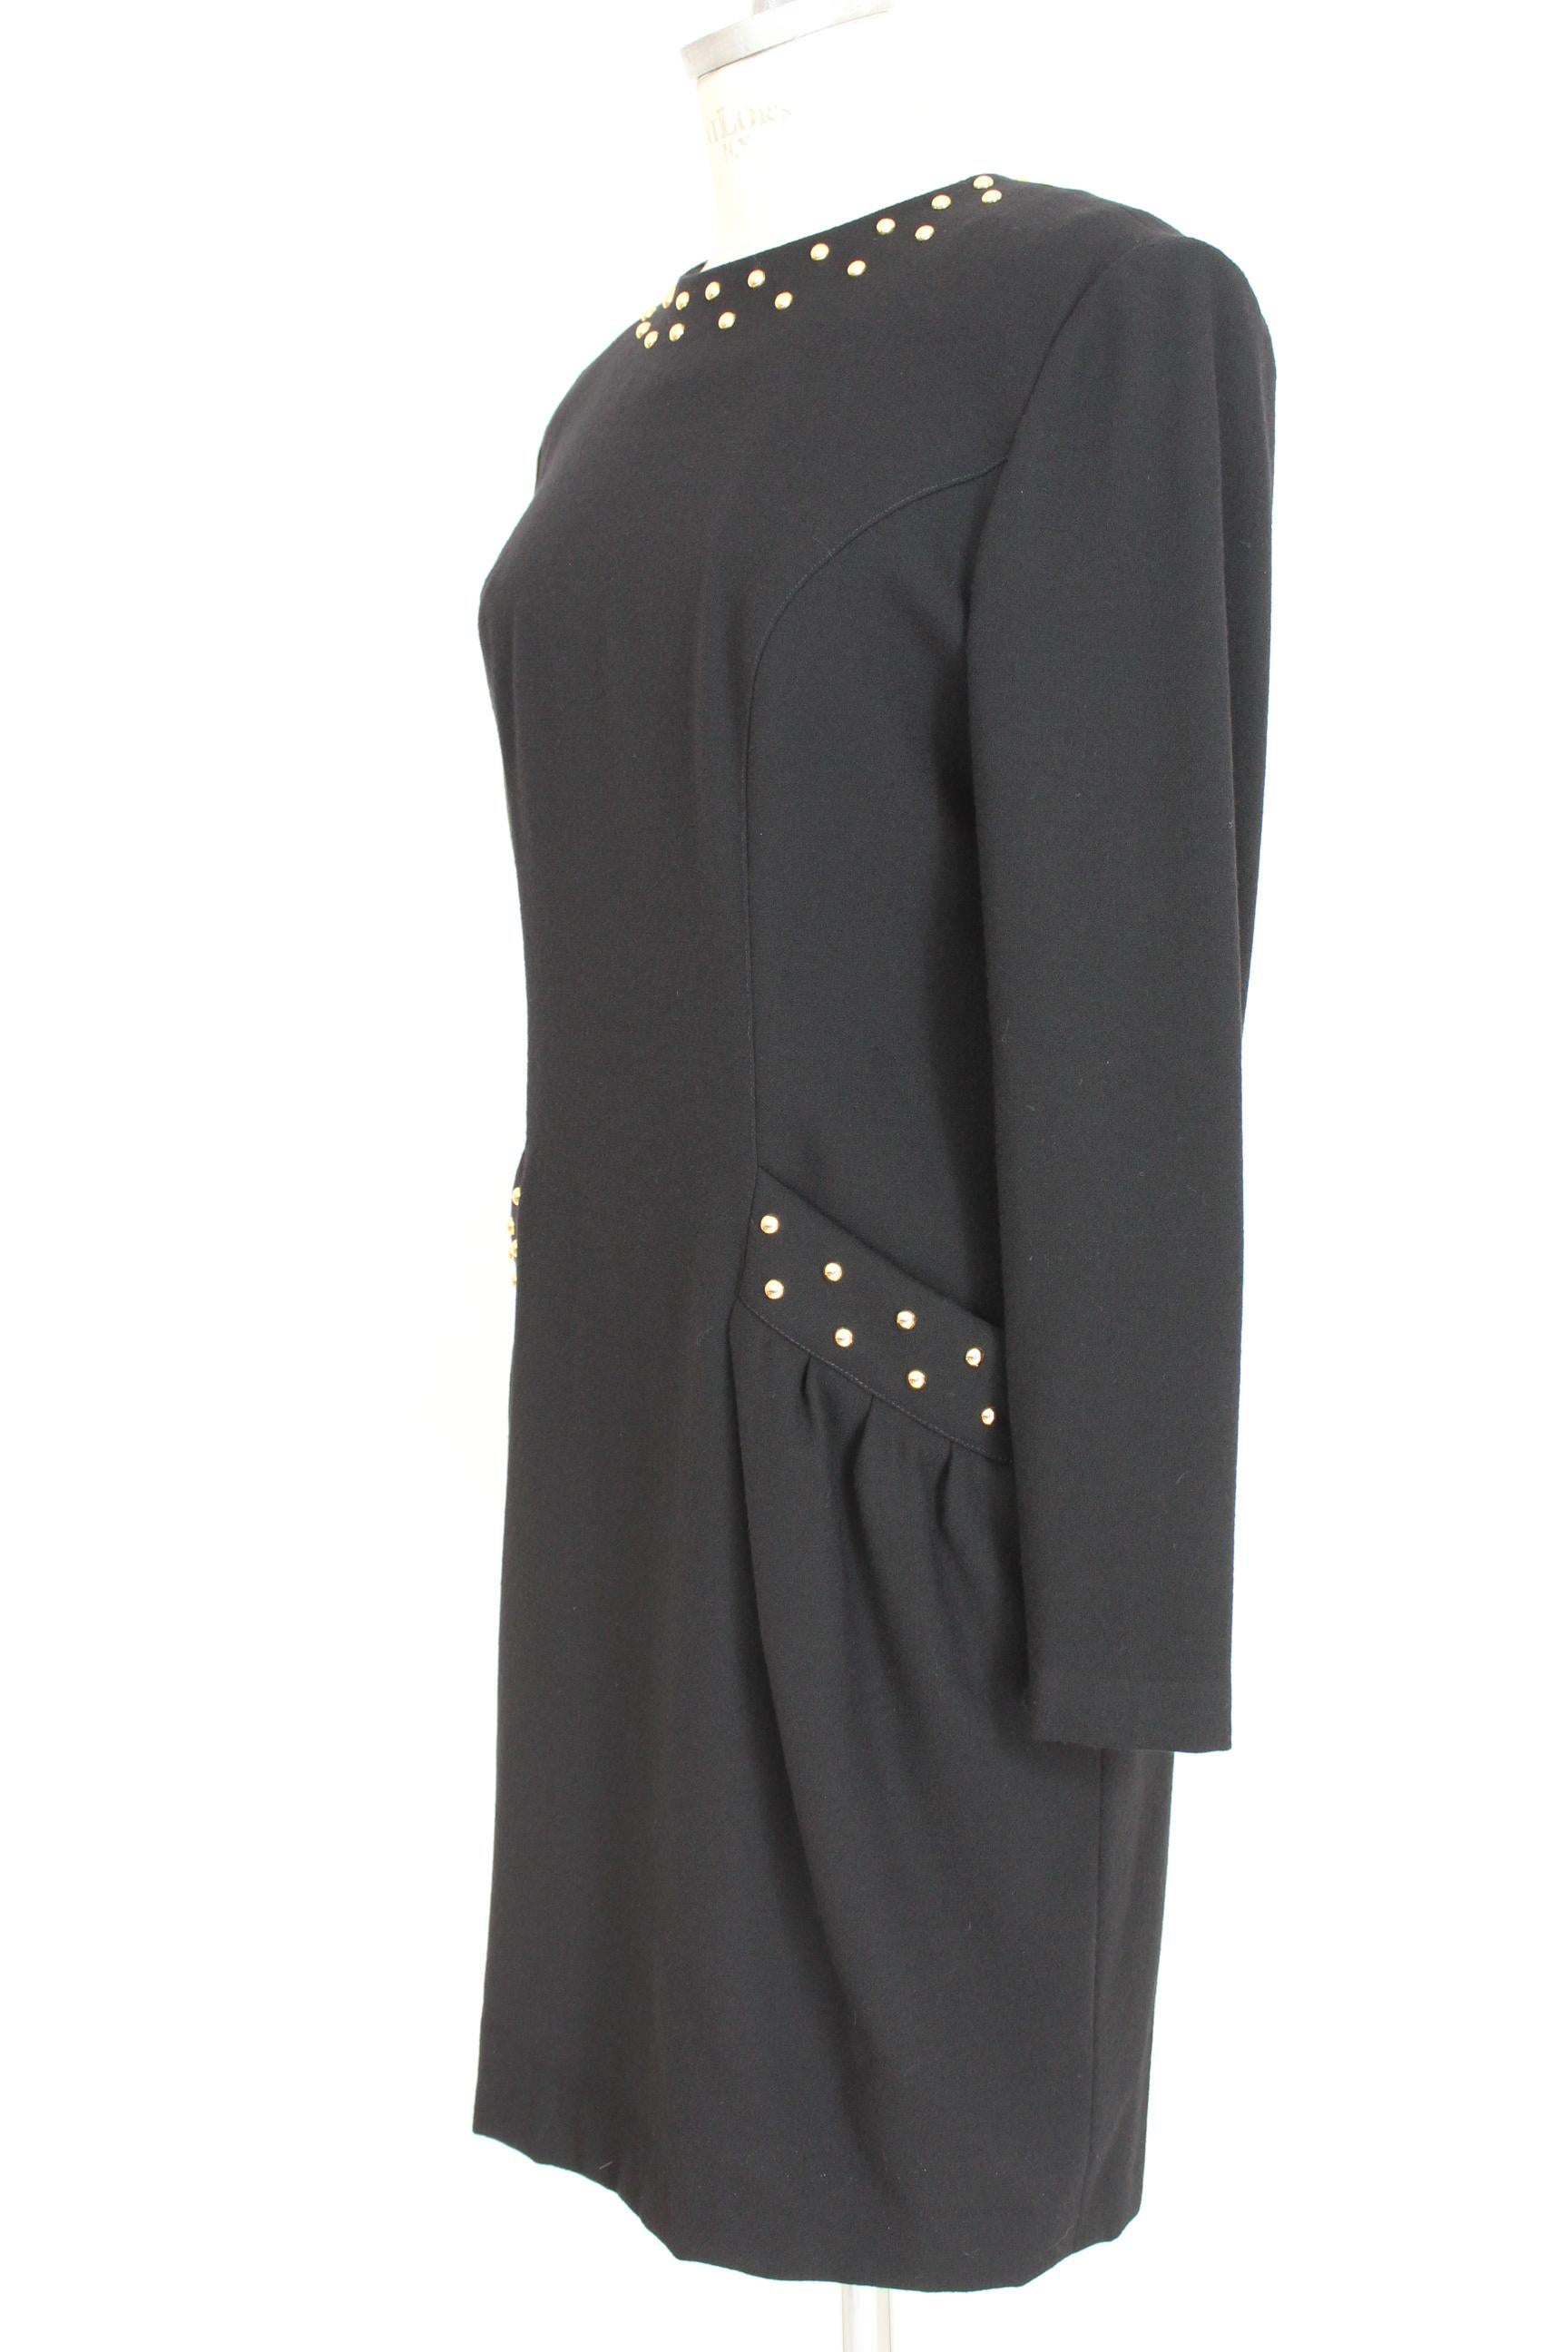 Guy Laroche Boutique Black Gold Wool Studs Sheath Cocktail Dress 1980s For Sale 1